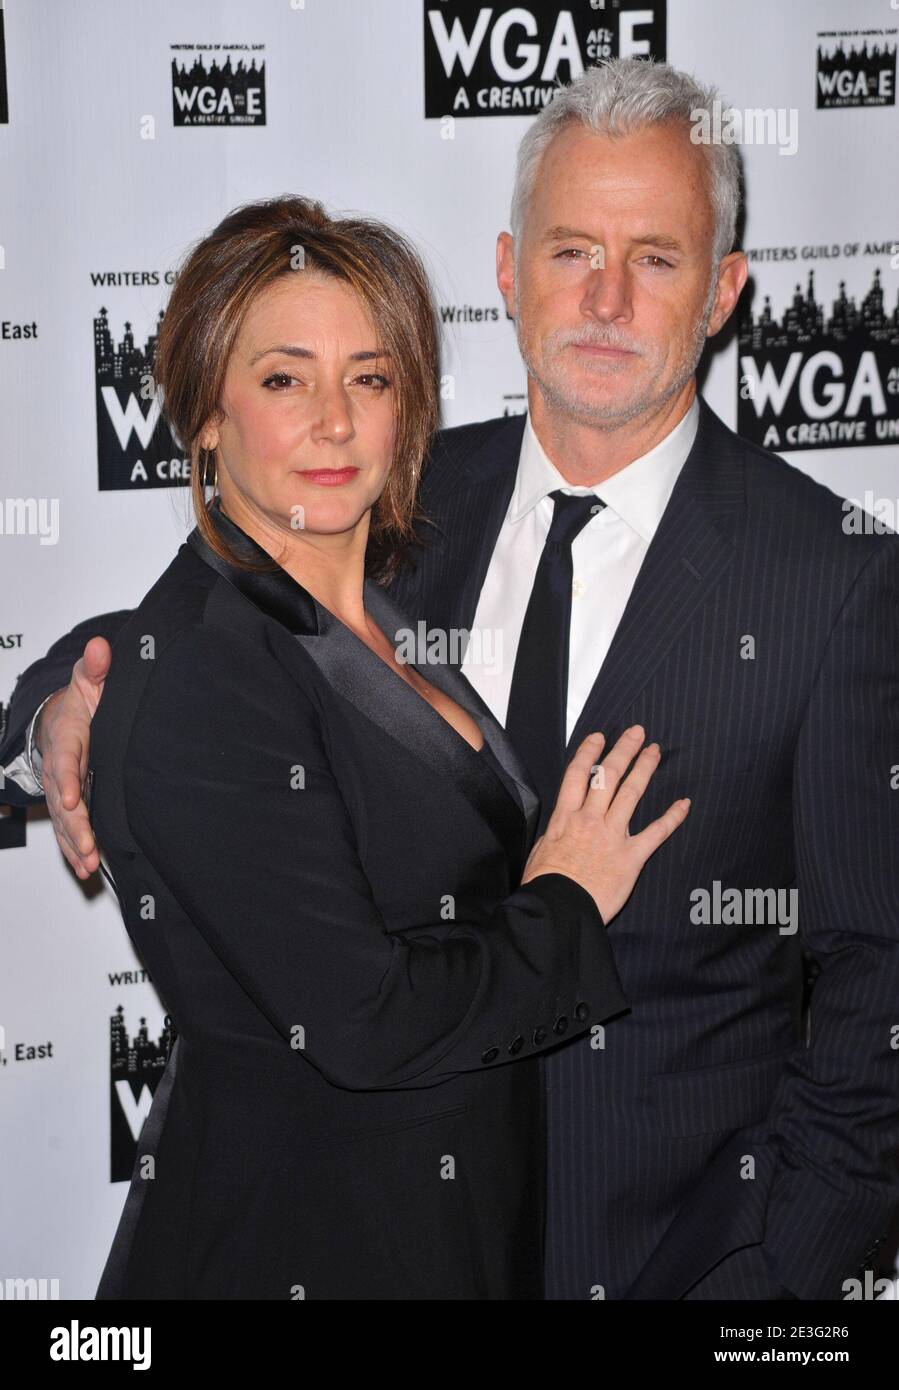 Actress Talia Balsam and actor John Slattery attend the 61st Annual Writers Guild Awards New York Ceremony at the Hudson Theatre inside the Millennium Broadway Hotel in New York City, USA on February 7, 2009. Photo by Gregorio Binuya/ABACAUSA.COM (Pictured : Talia Balsam, John Slattery) Stock Photo